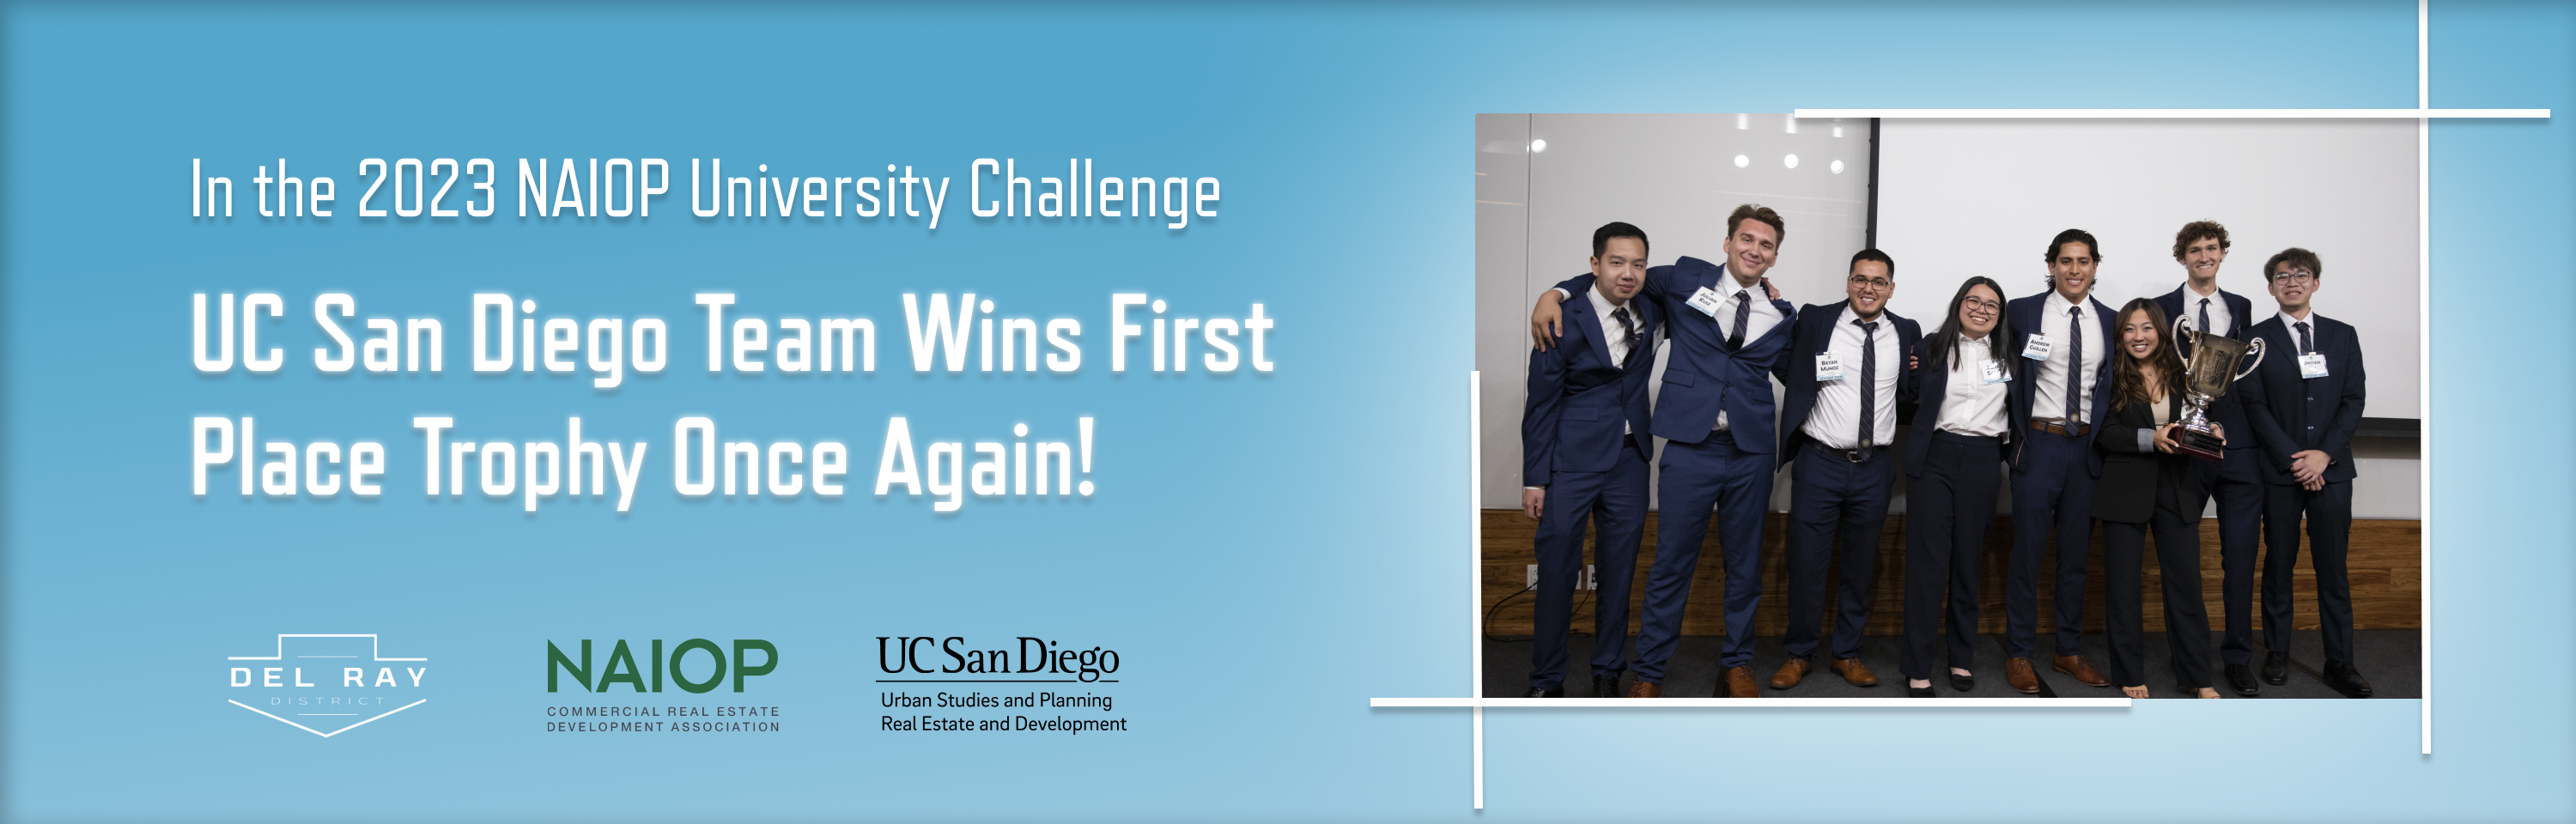 2023 NAIOP Banner that shows that UC San Diego Team Wins First Place Trophy Once Again! 